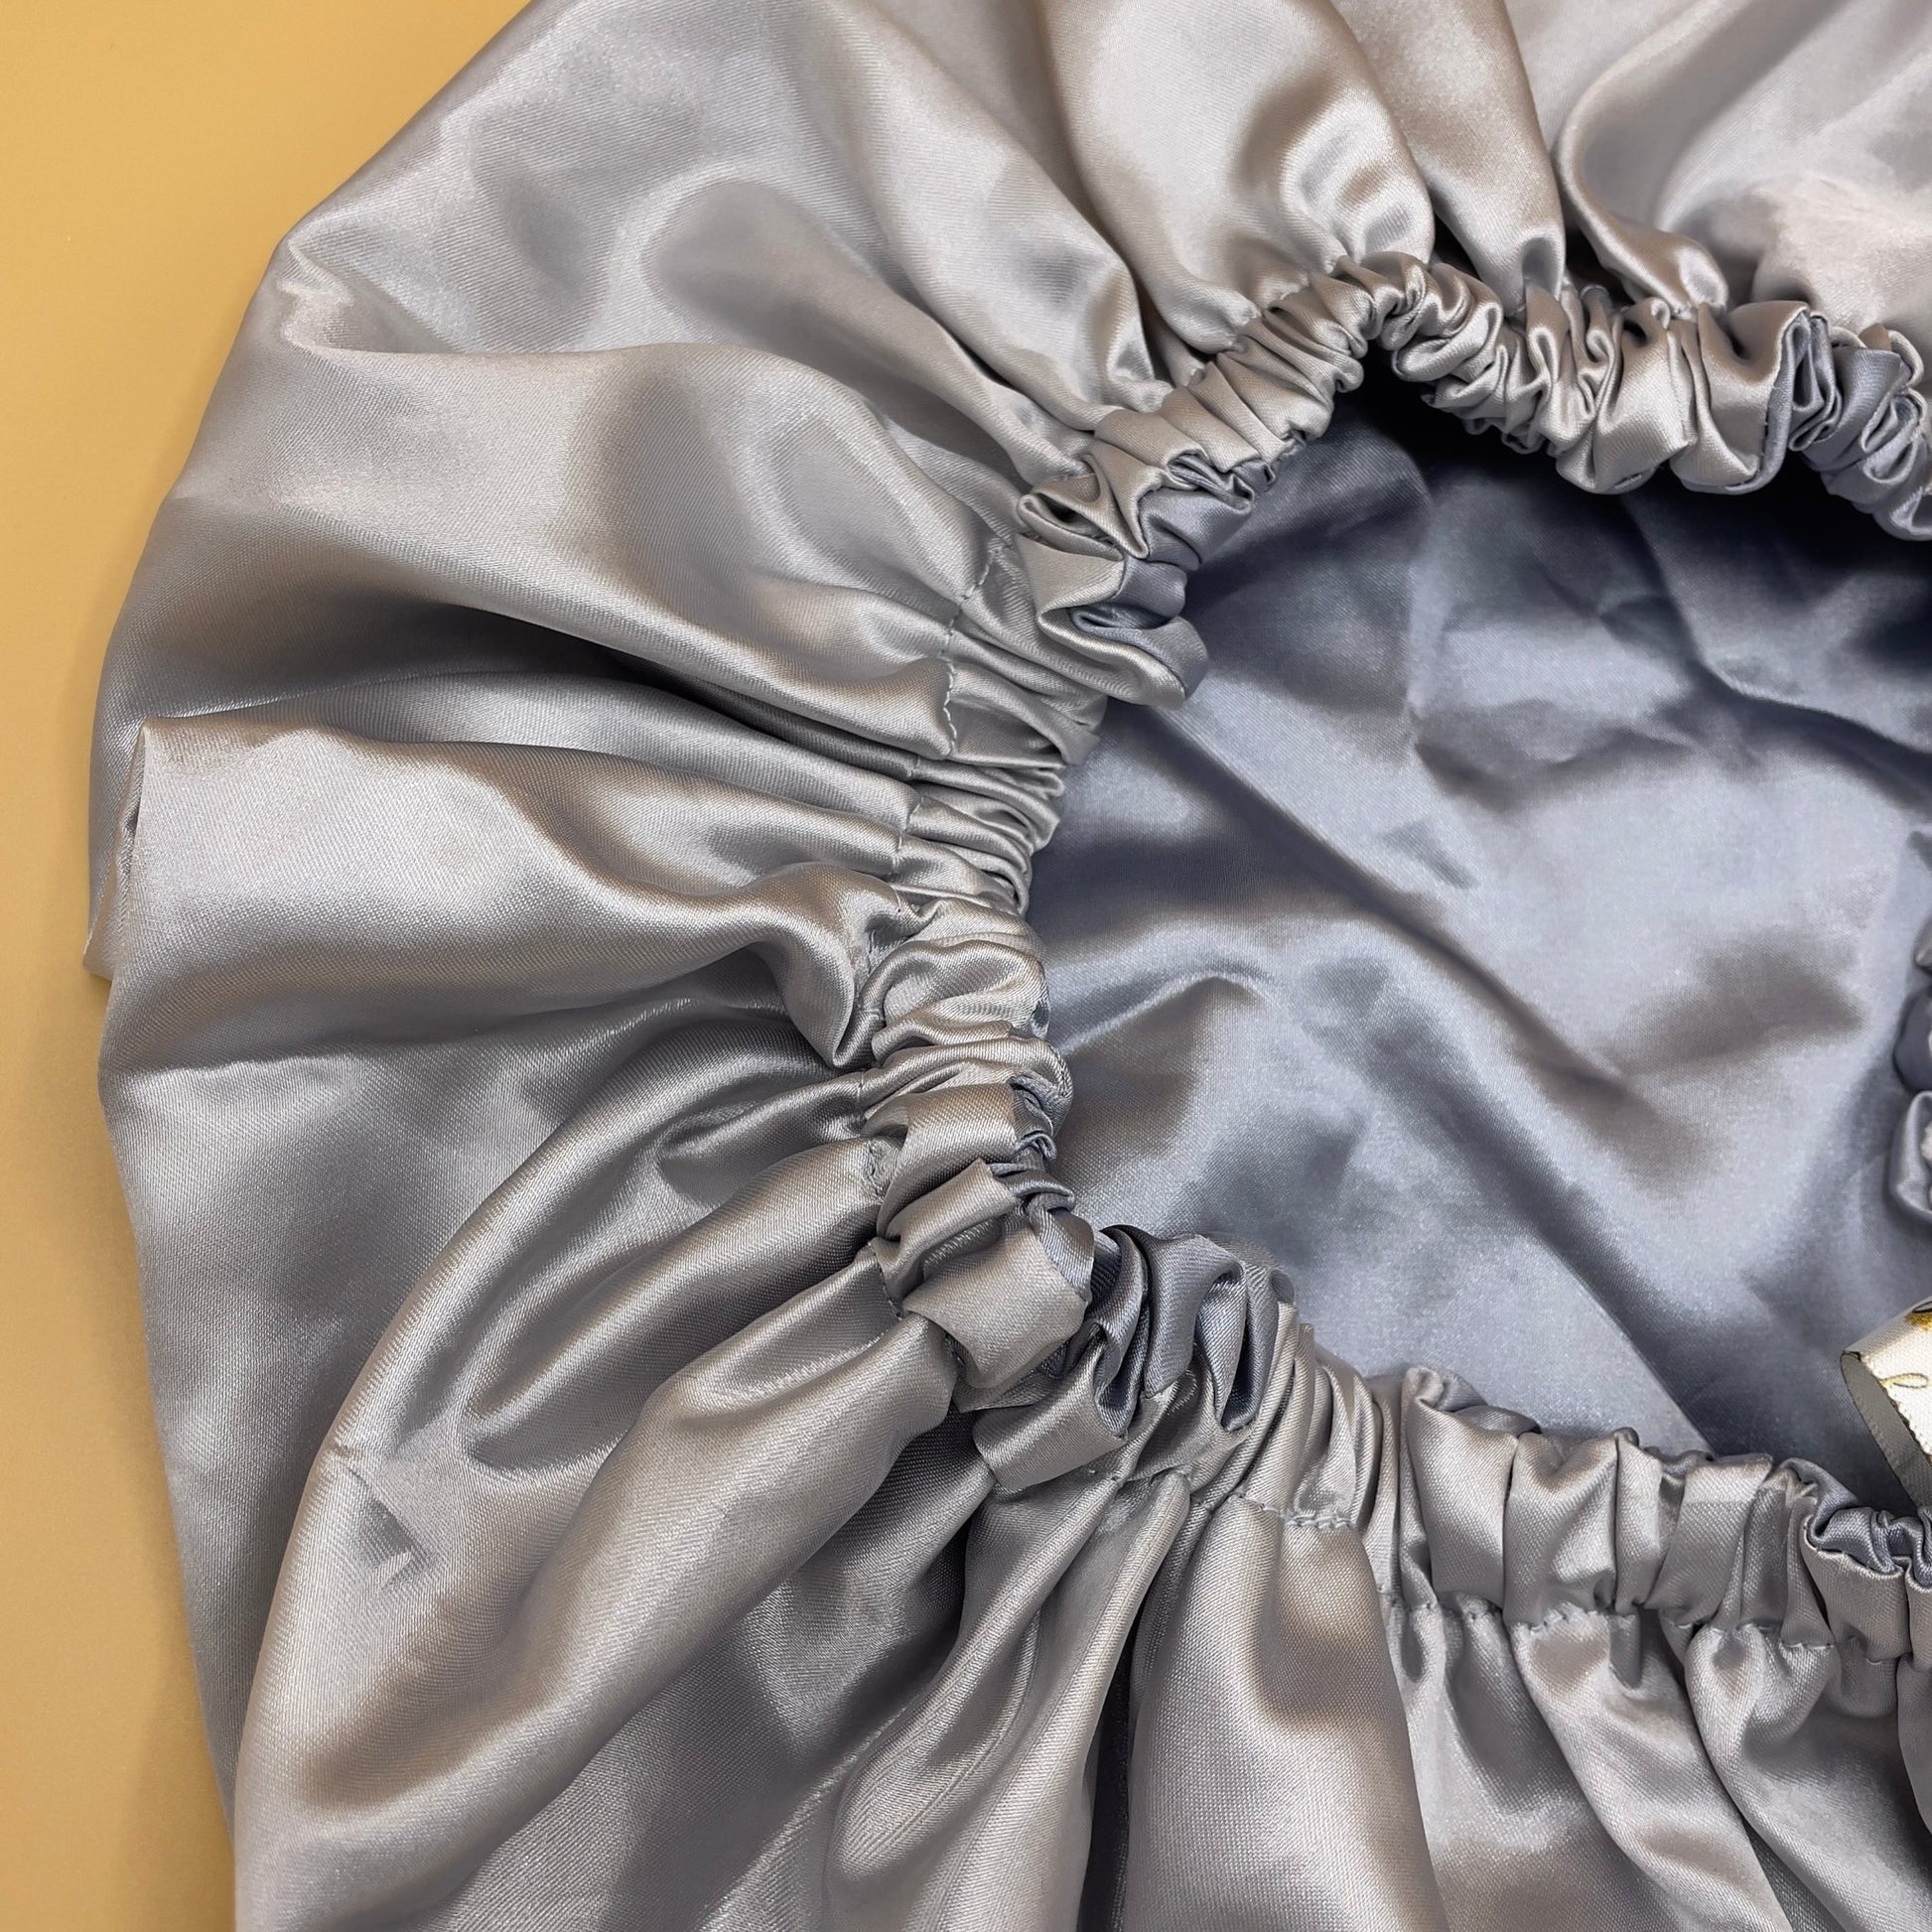 Twilight Silver Satin Bonnet - Crowned by Royalty